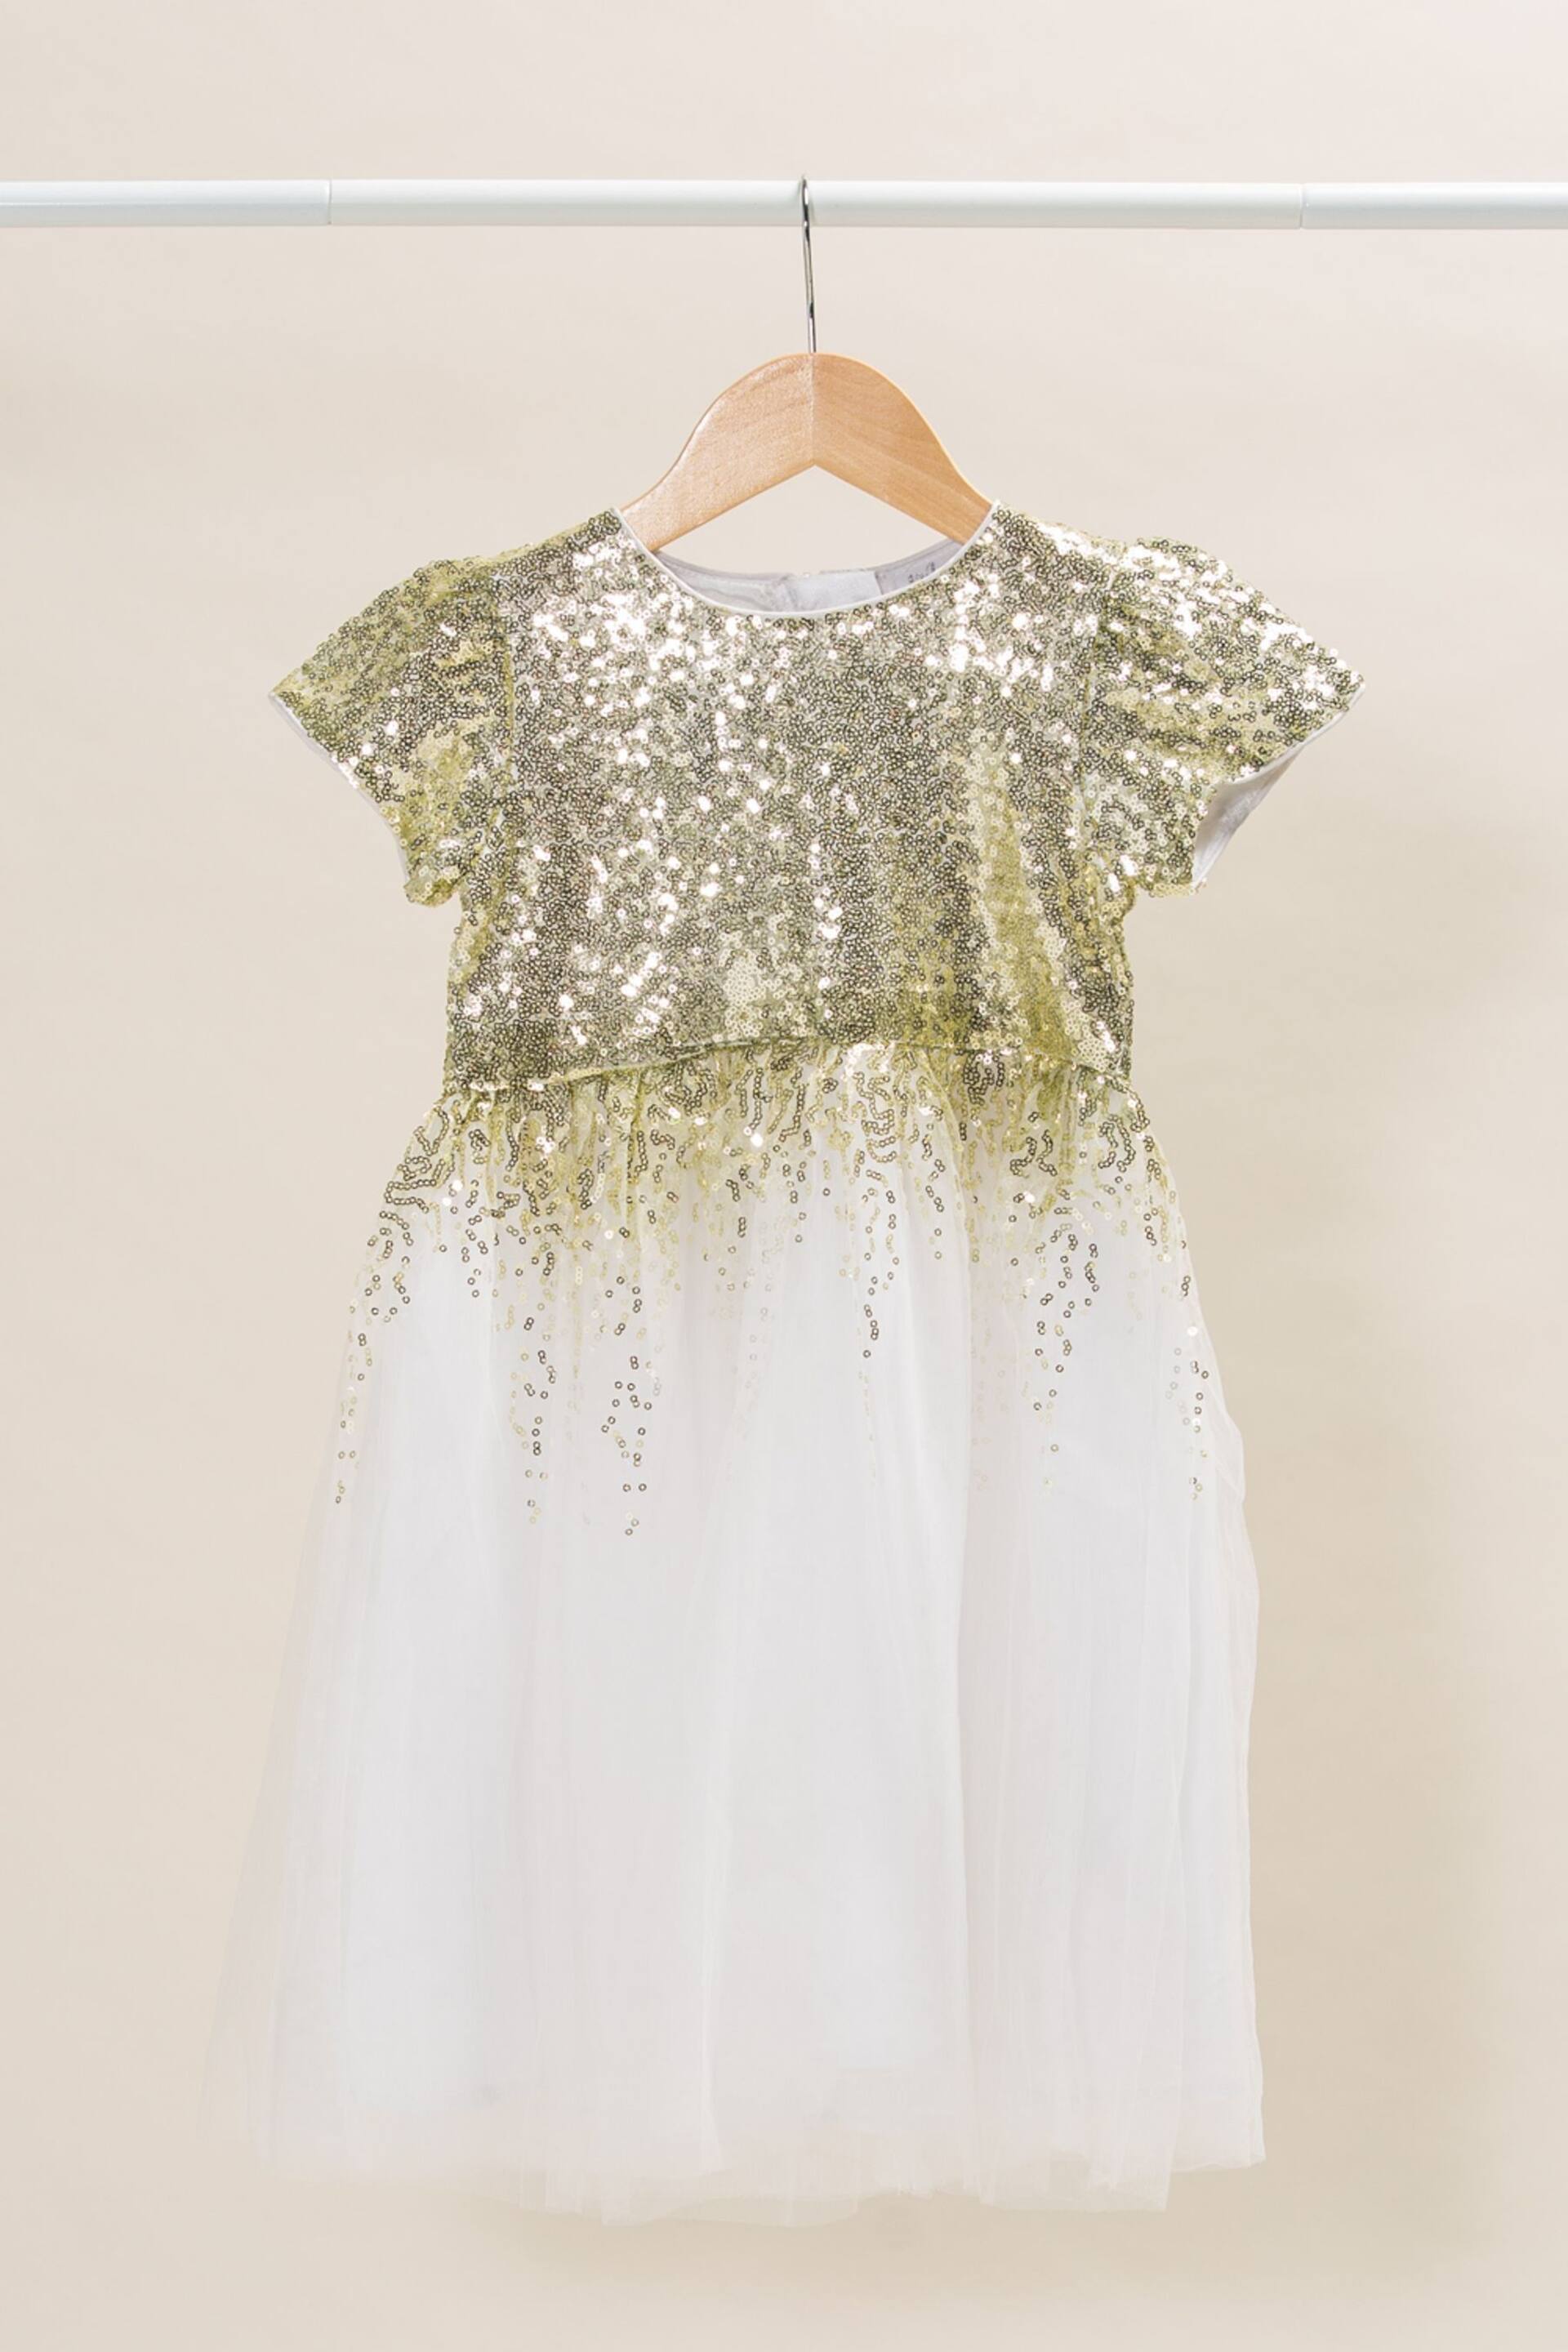 Miss Sequin Top Waterfall Tulle Dress - Image 1 of 3